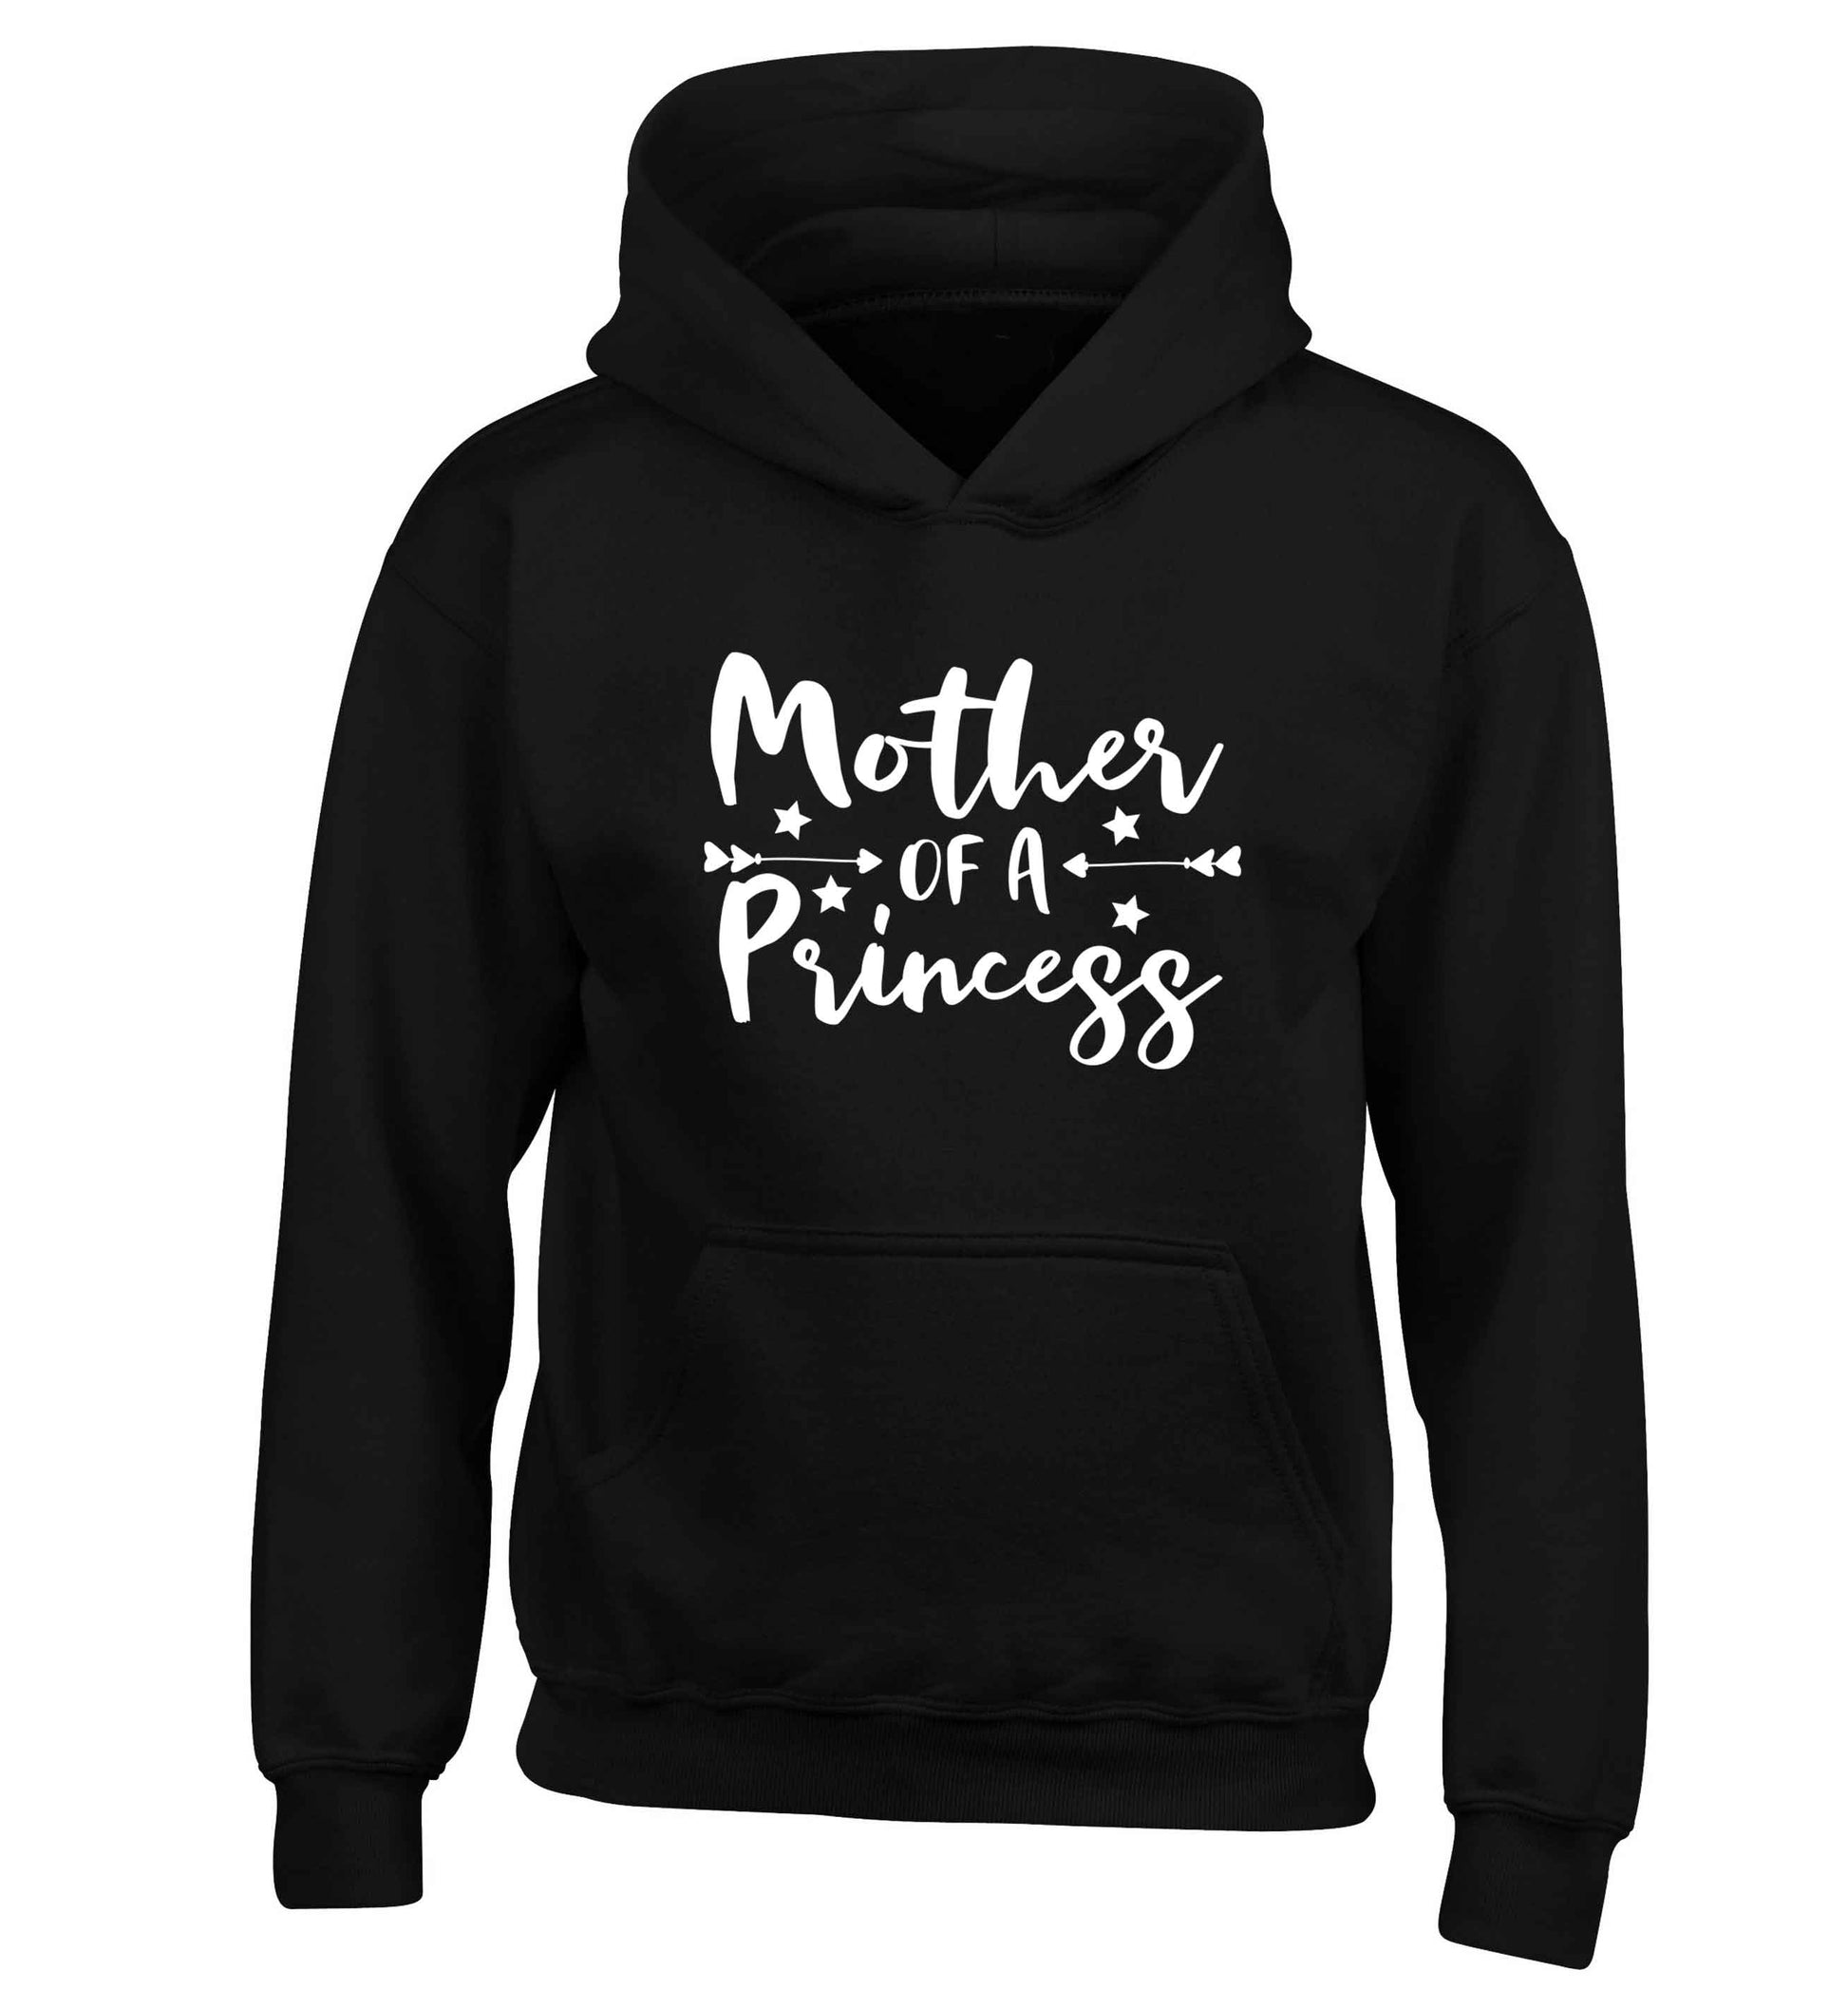 Mother of a princess children's black hoodie 12-13 Years